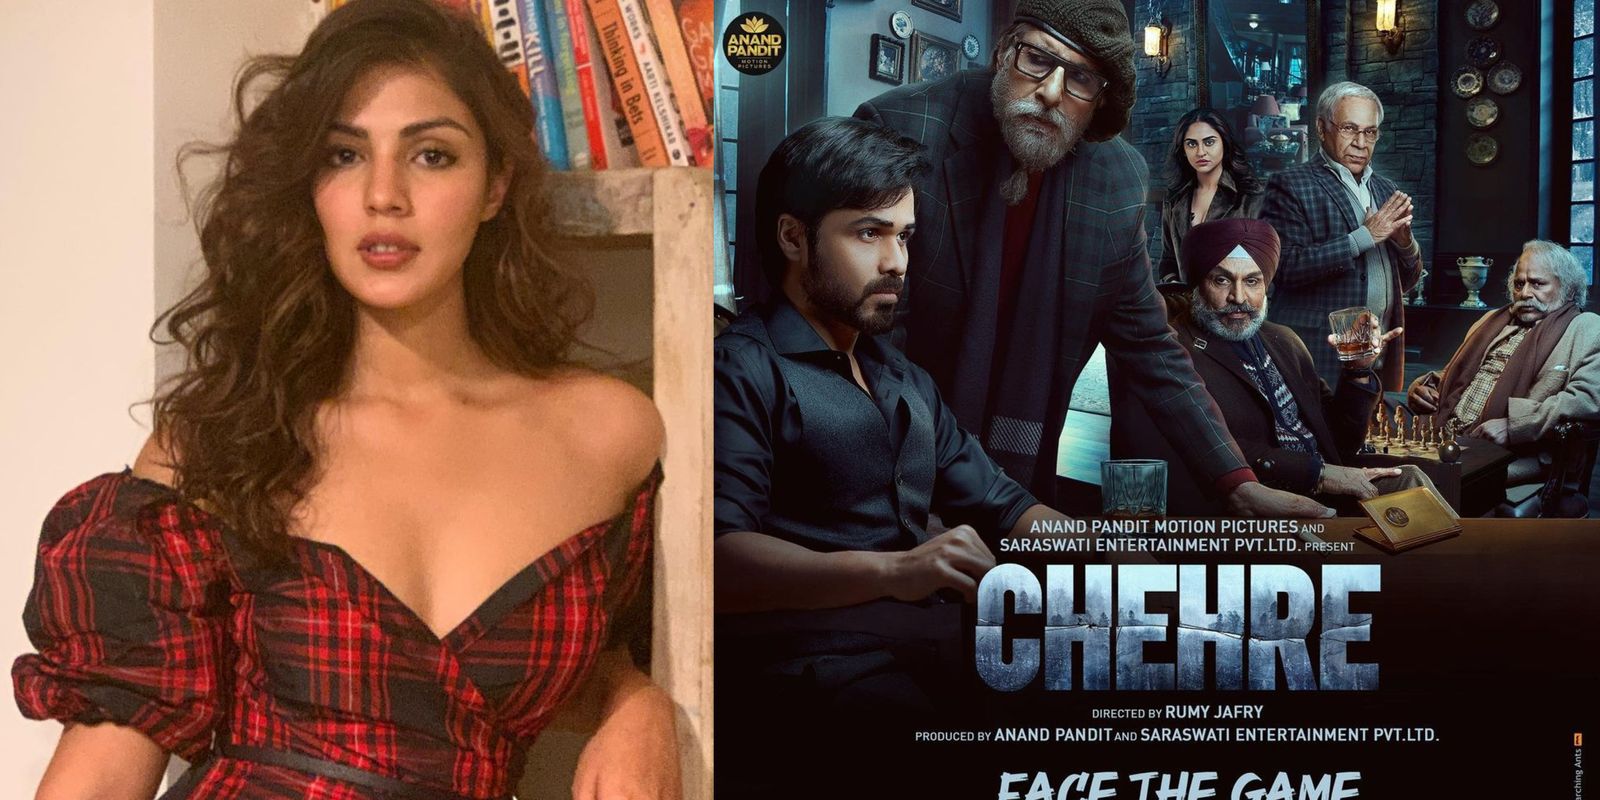 Chehre: After Rhea Chakraborty Goes Missing From Teaser, Producer Reveals They Have Decided Not To Talk About Her